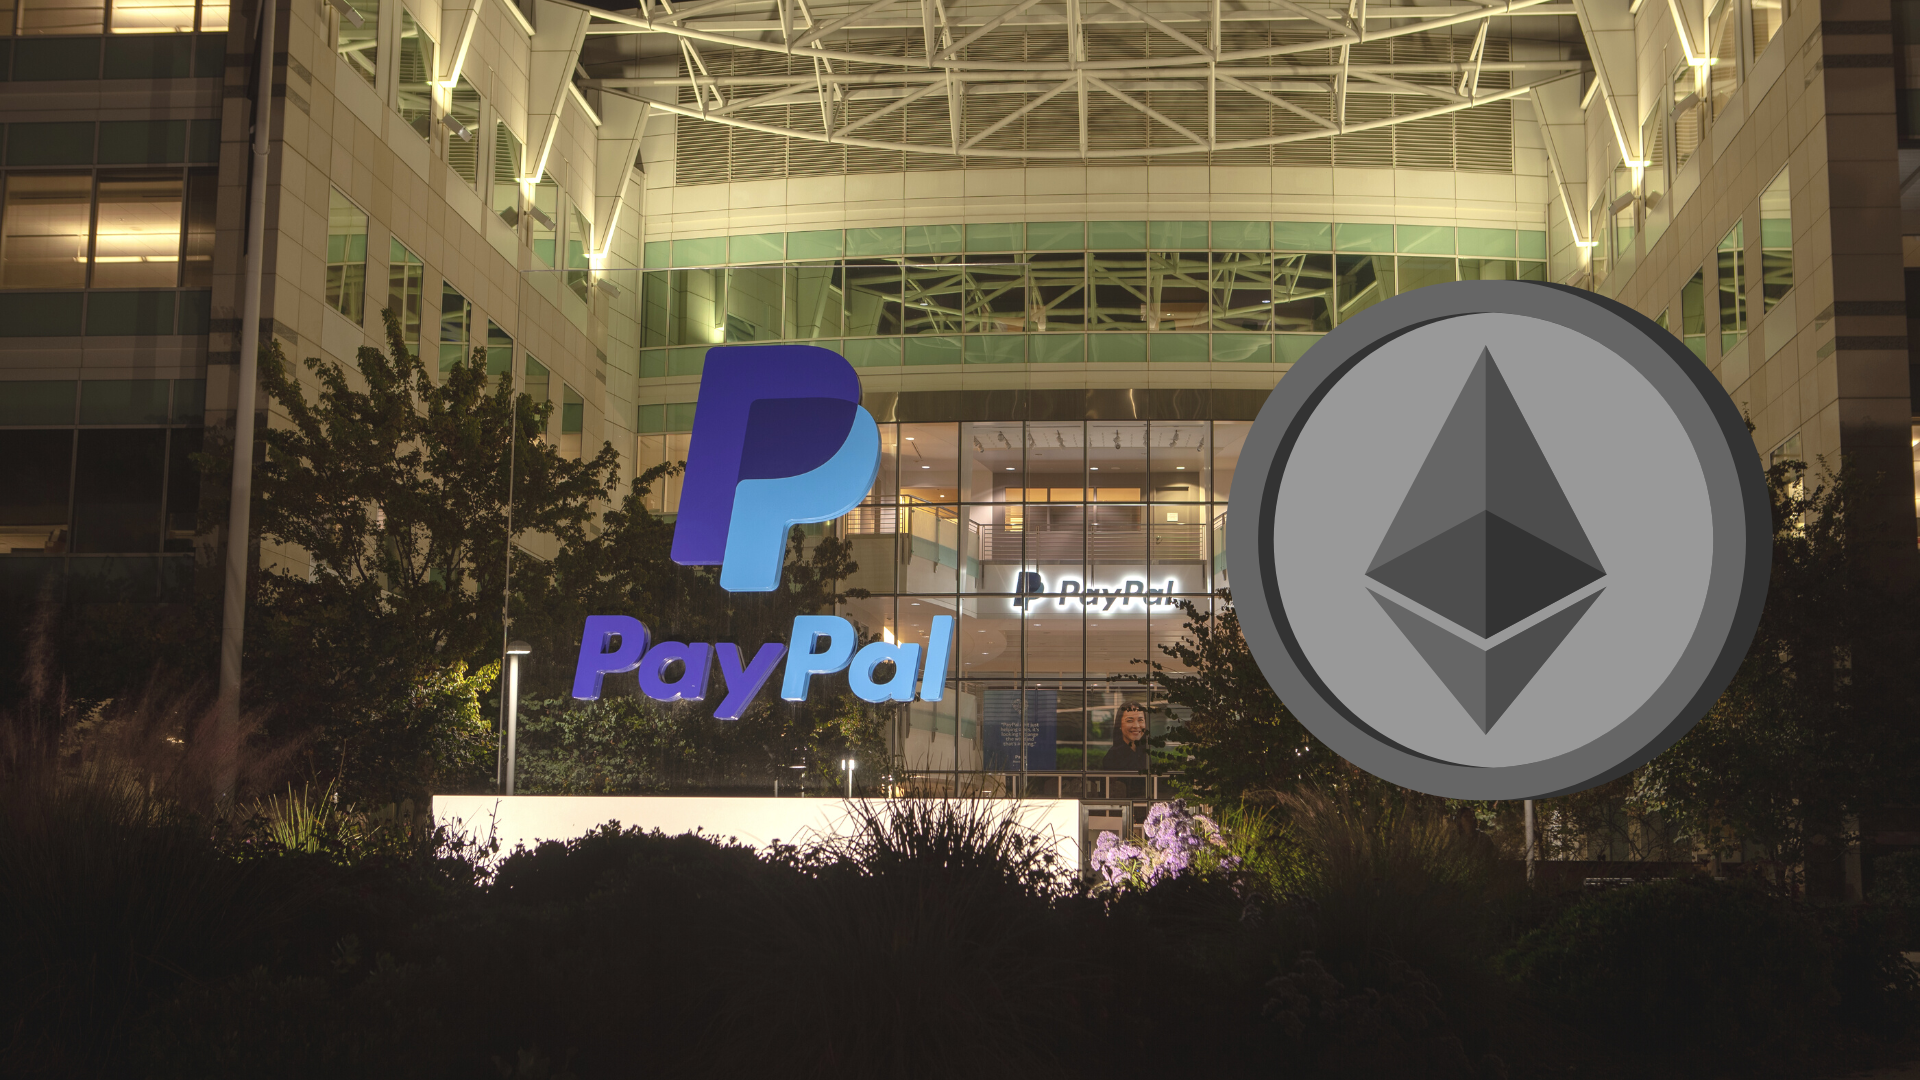 MetaMask – PayPal Collaboration: Users can transact Ethereum through Paypal 